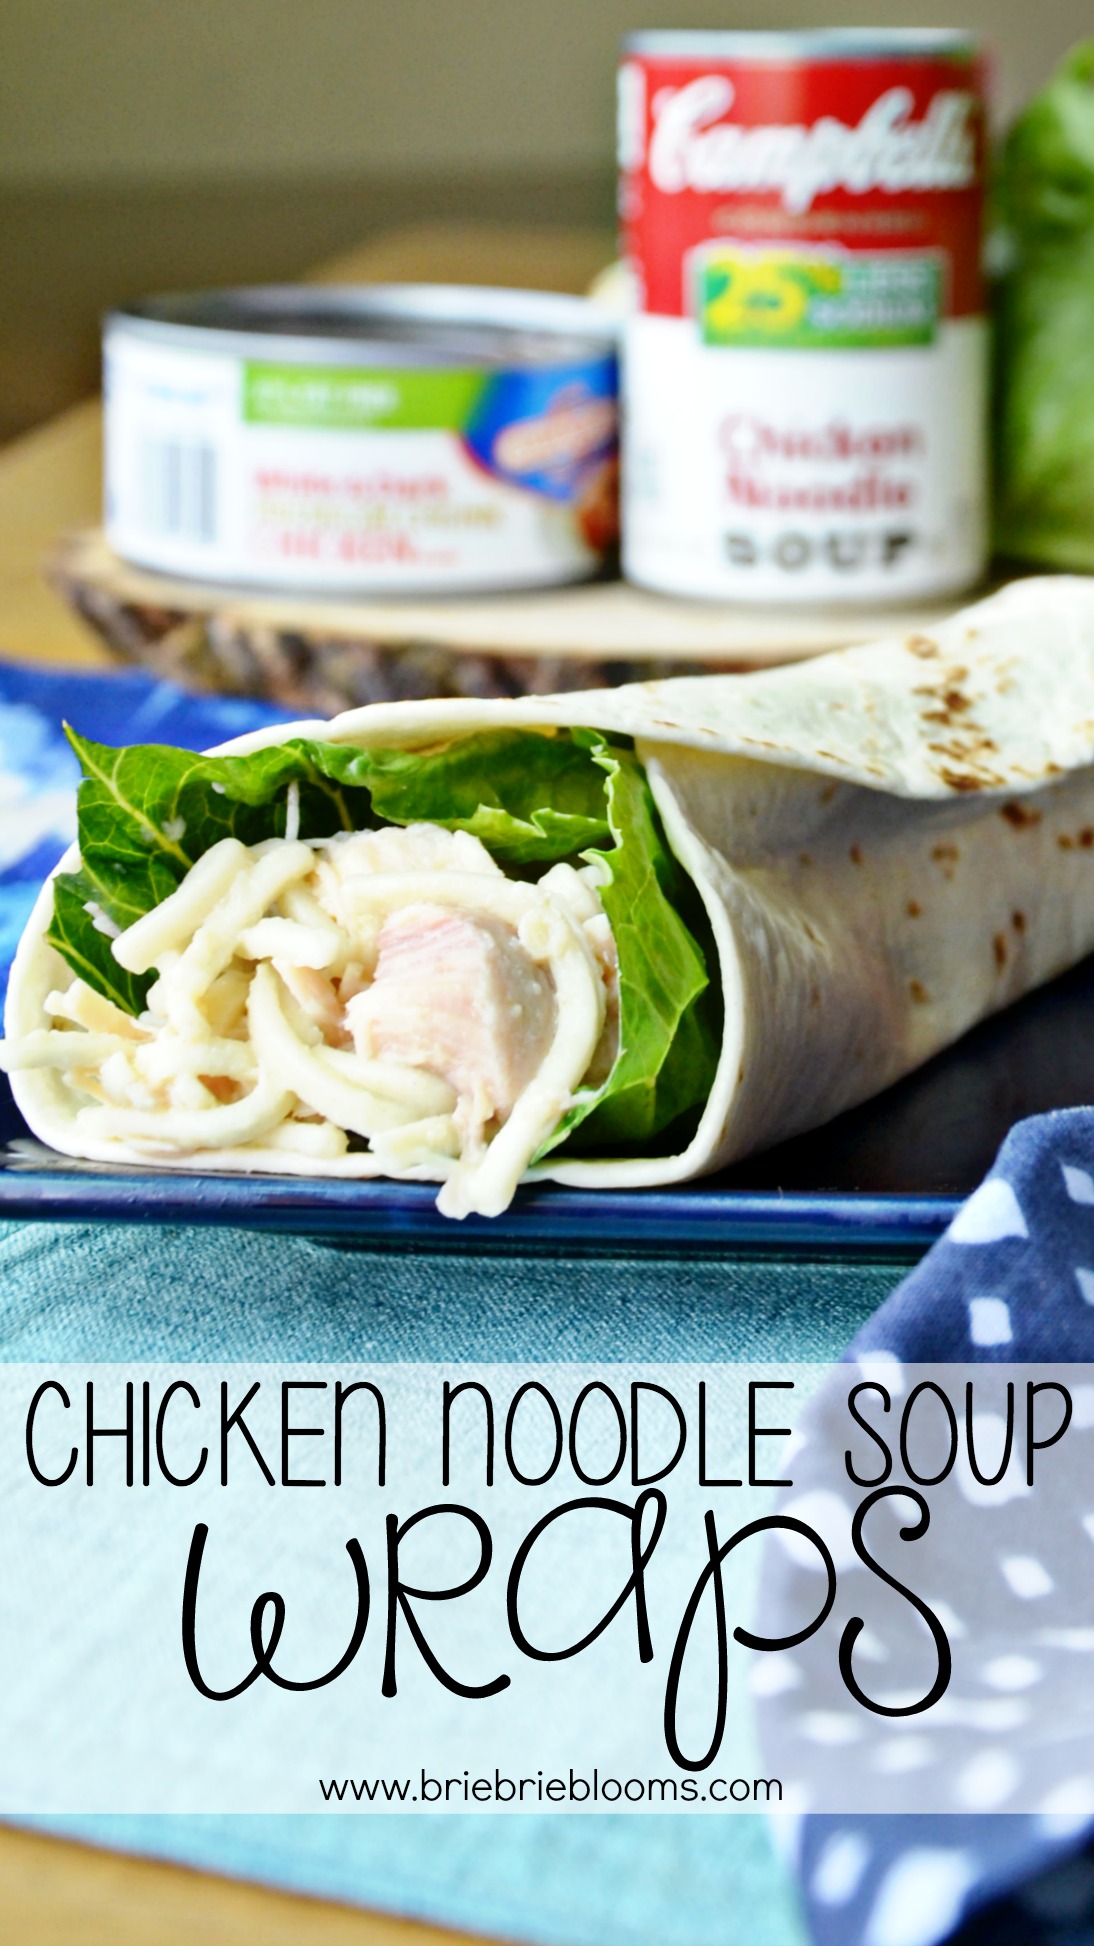 Busy back to school routines call for easy meal plans with yummy recipes like these chicken noodle soup wraps. They're a fun way to serve a family favorite!